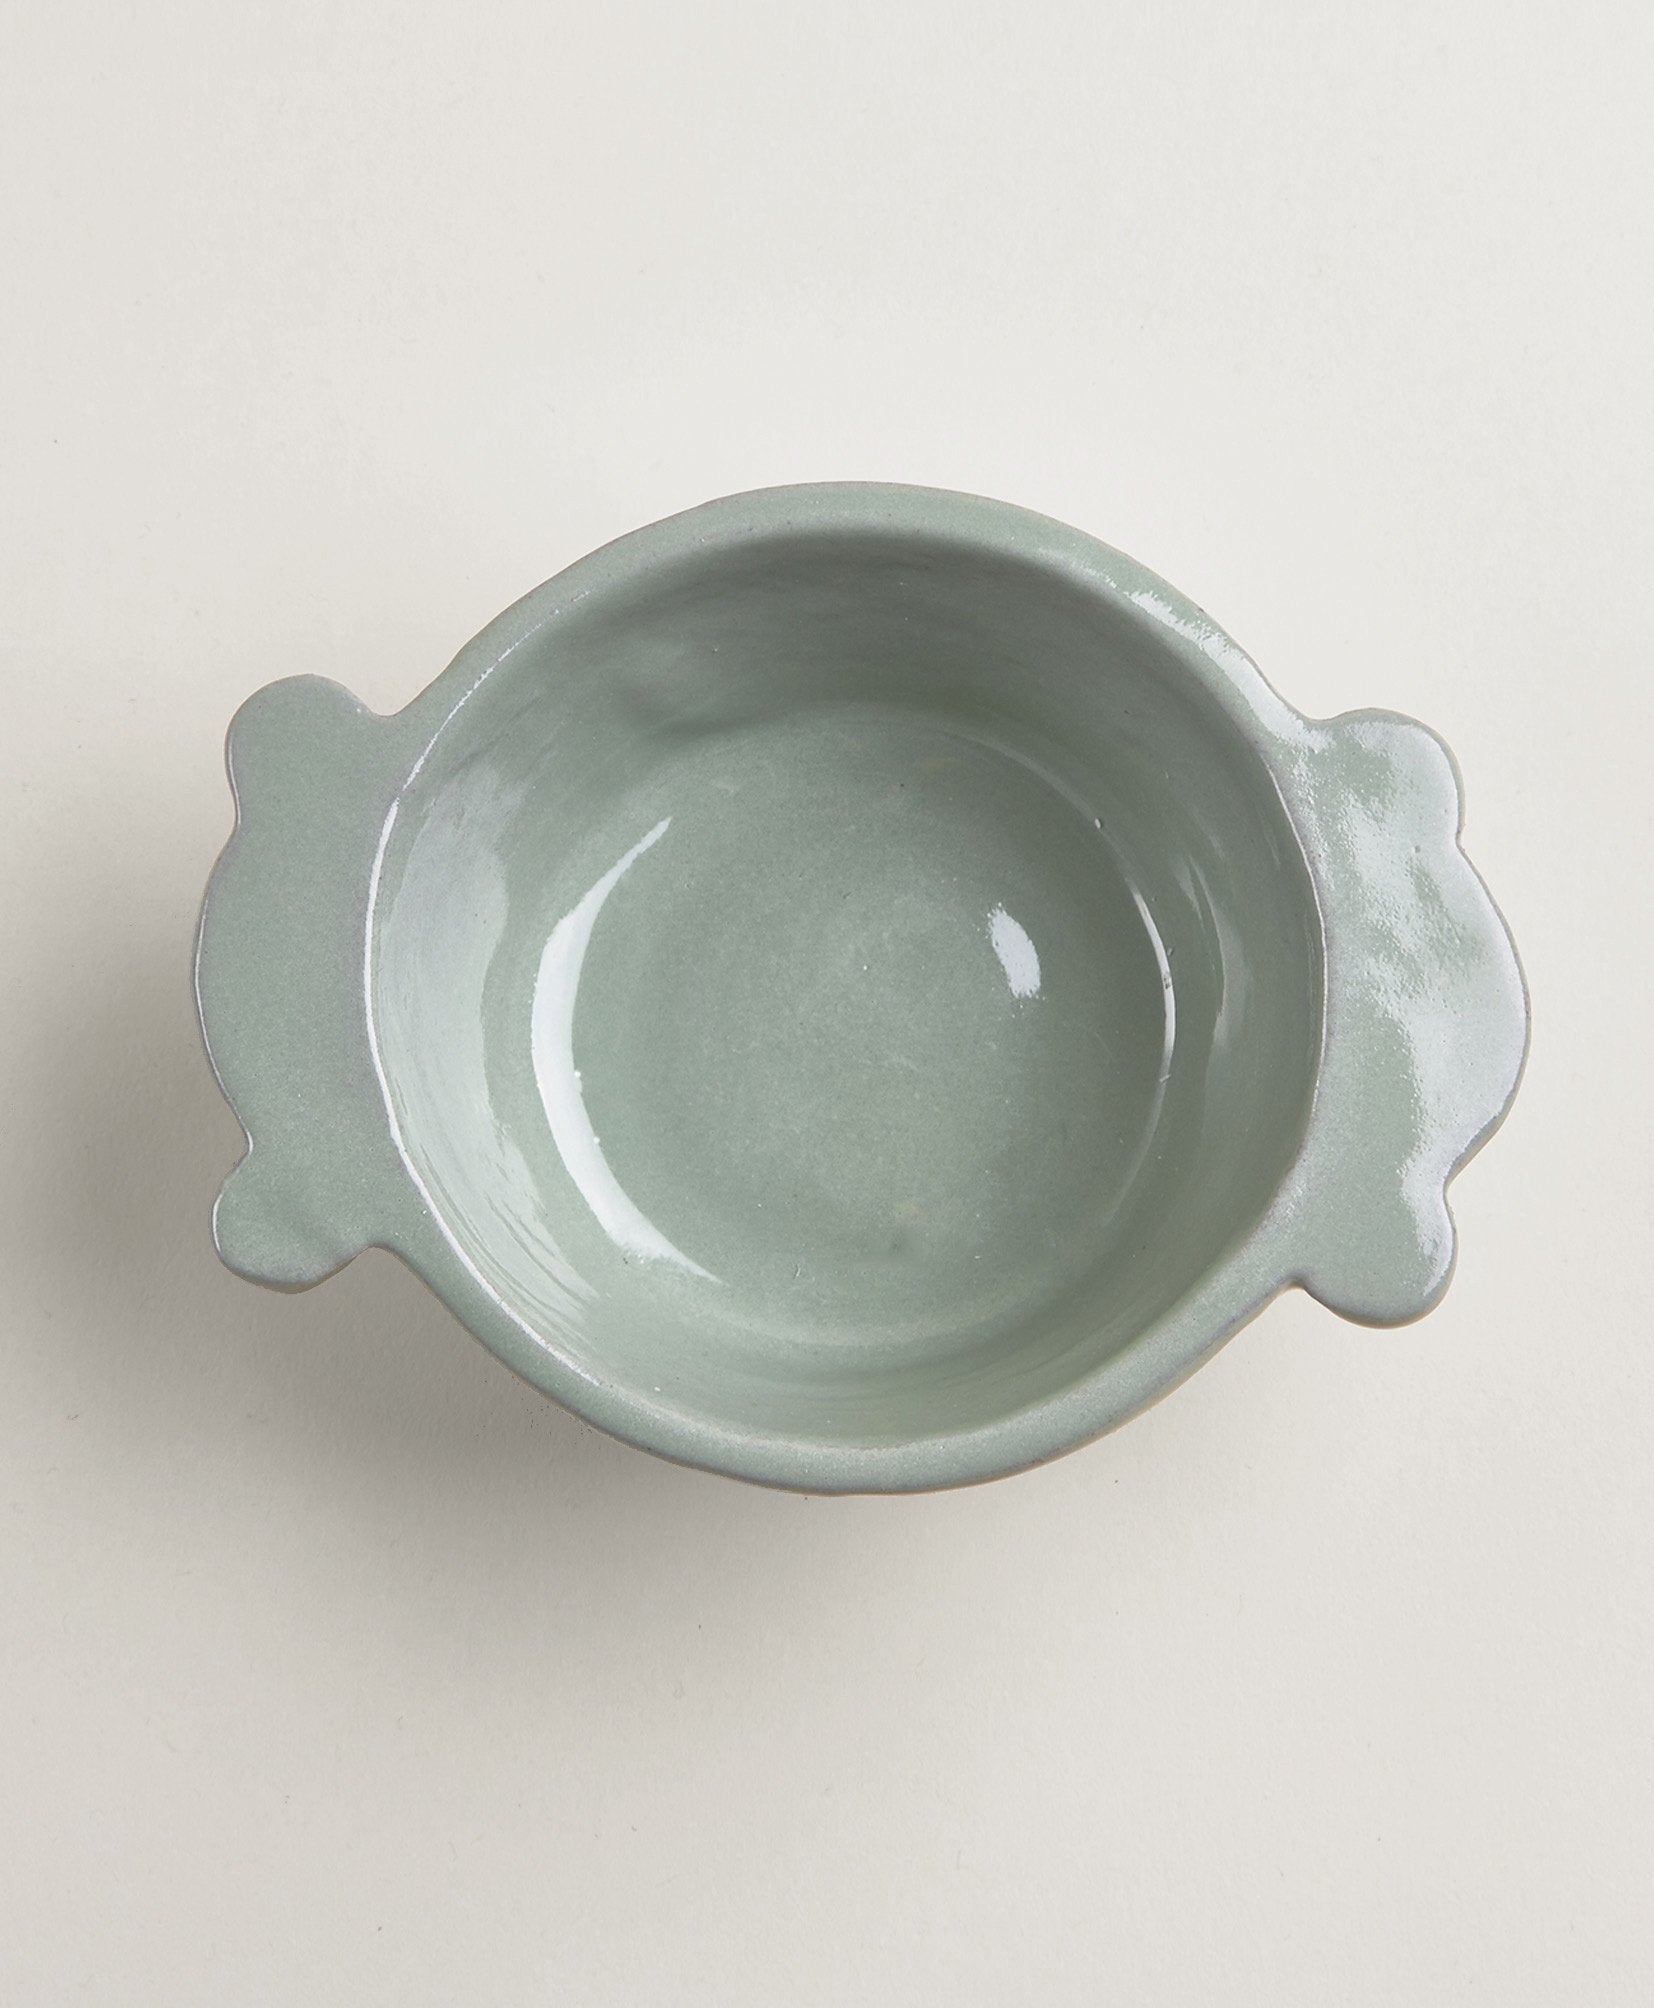   Bowl with Handles  